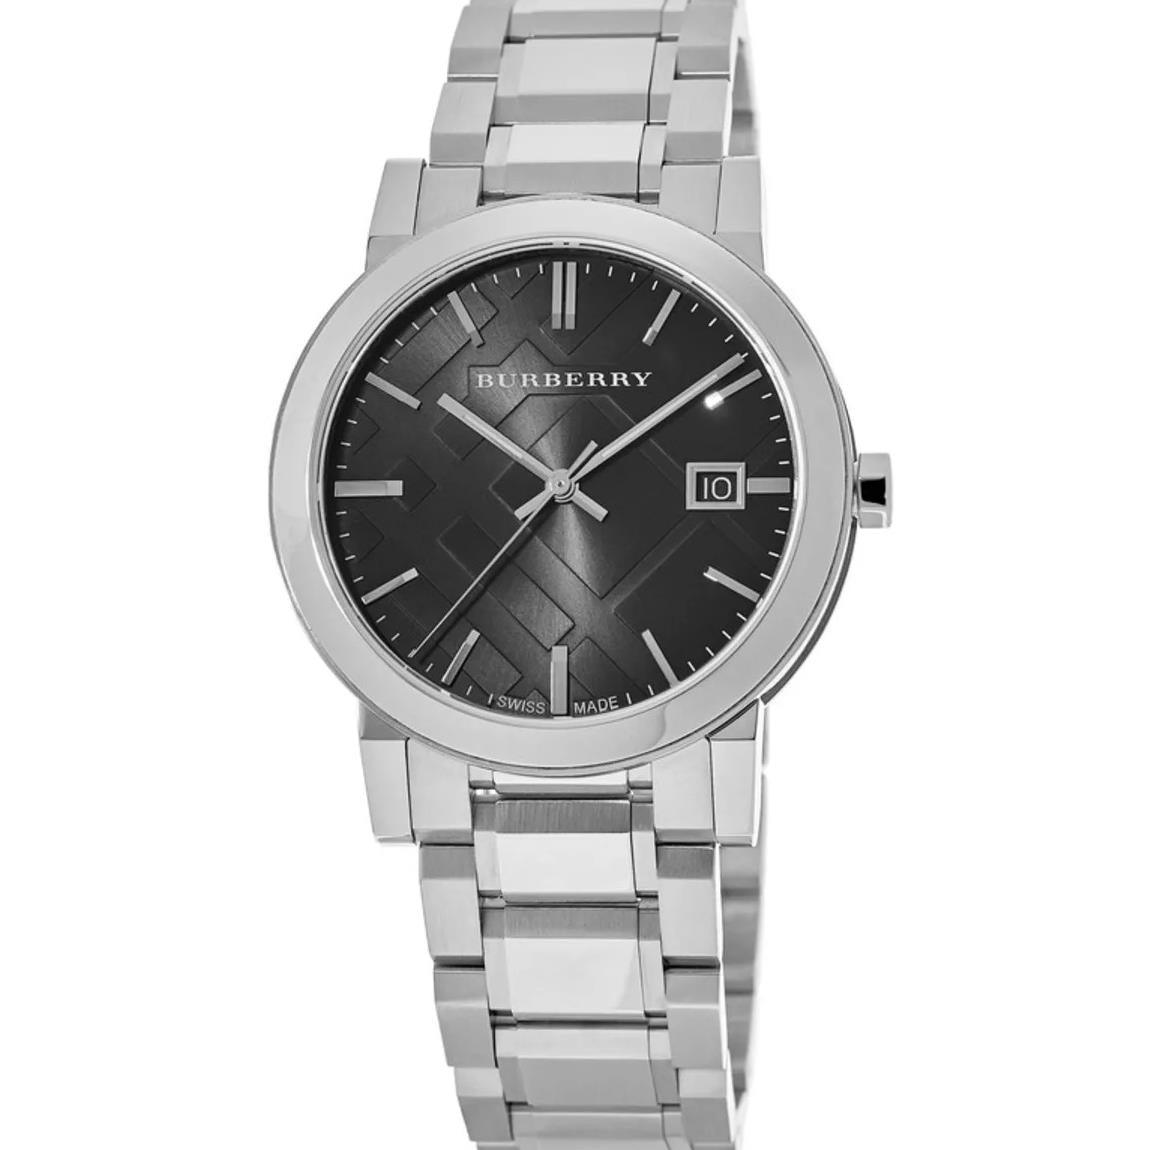 Burberry BU9001 Black Dial Stainless Steel Unisex Watch - Watch Home™